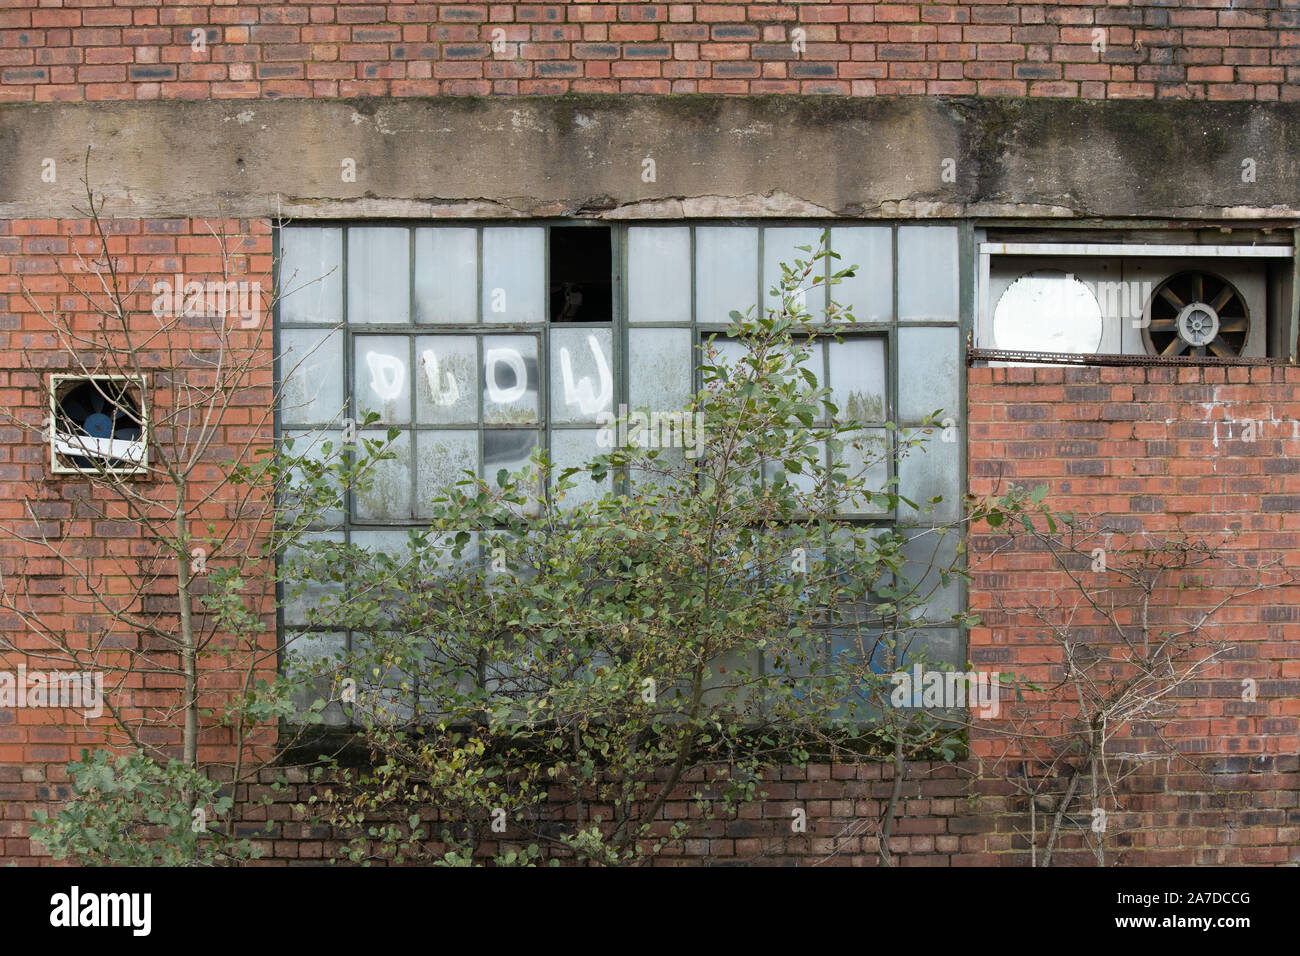 Atherstone hat factory, Coventry canal, Atherstone. The dilapidated building has stood empty and is now set to become housing for the elderly. Stock Photo